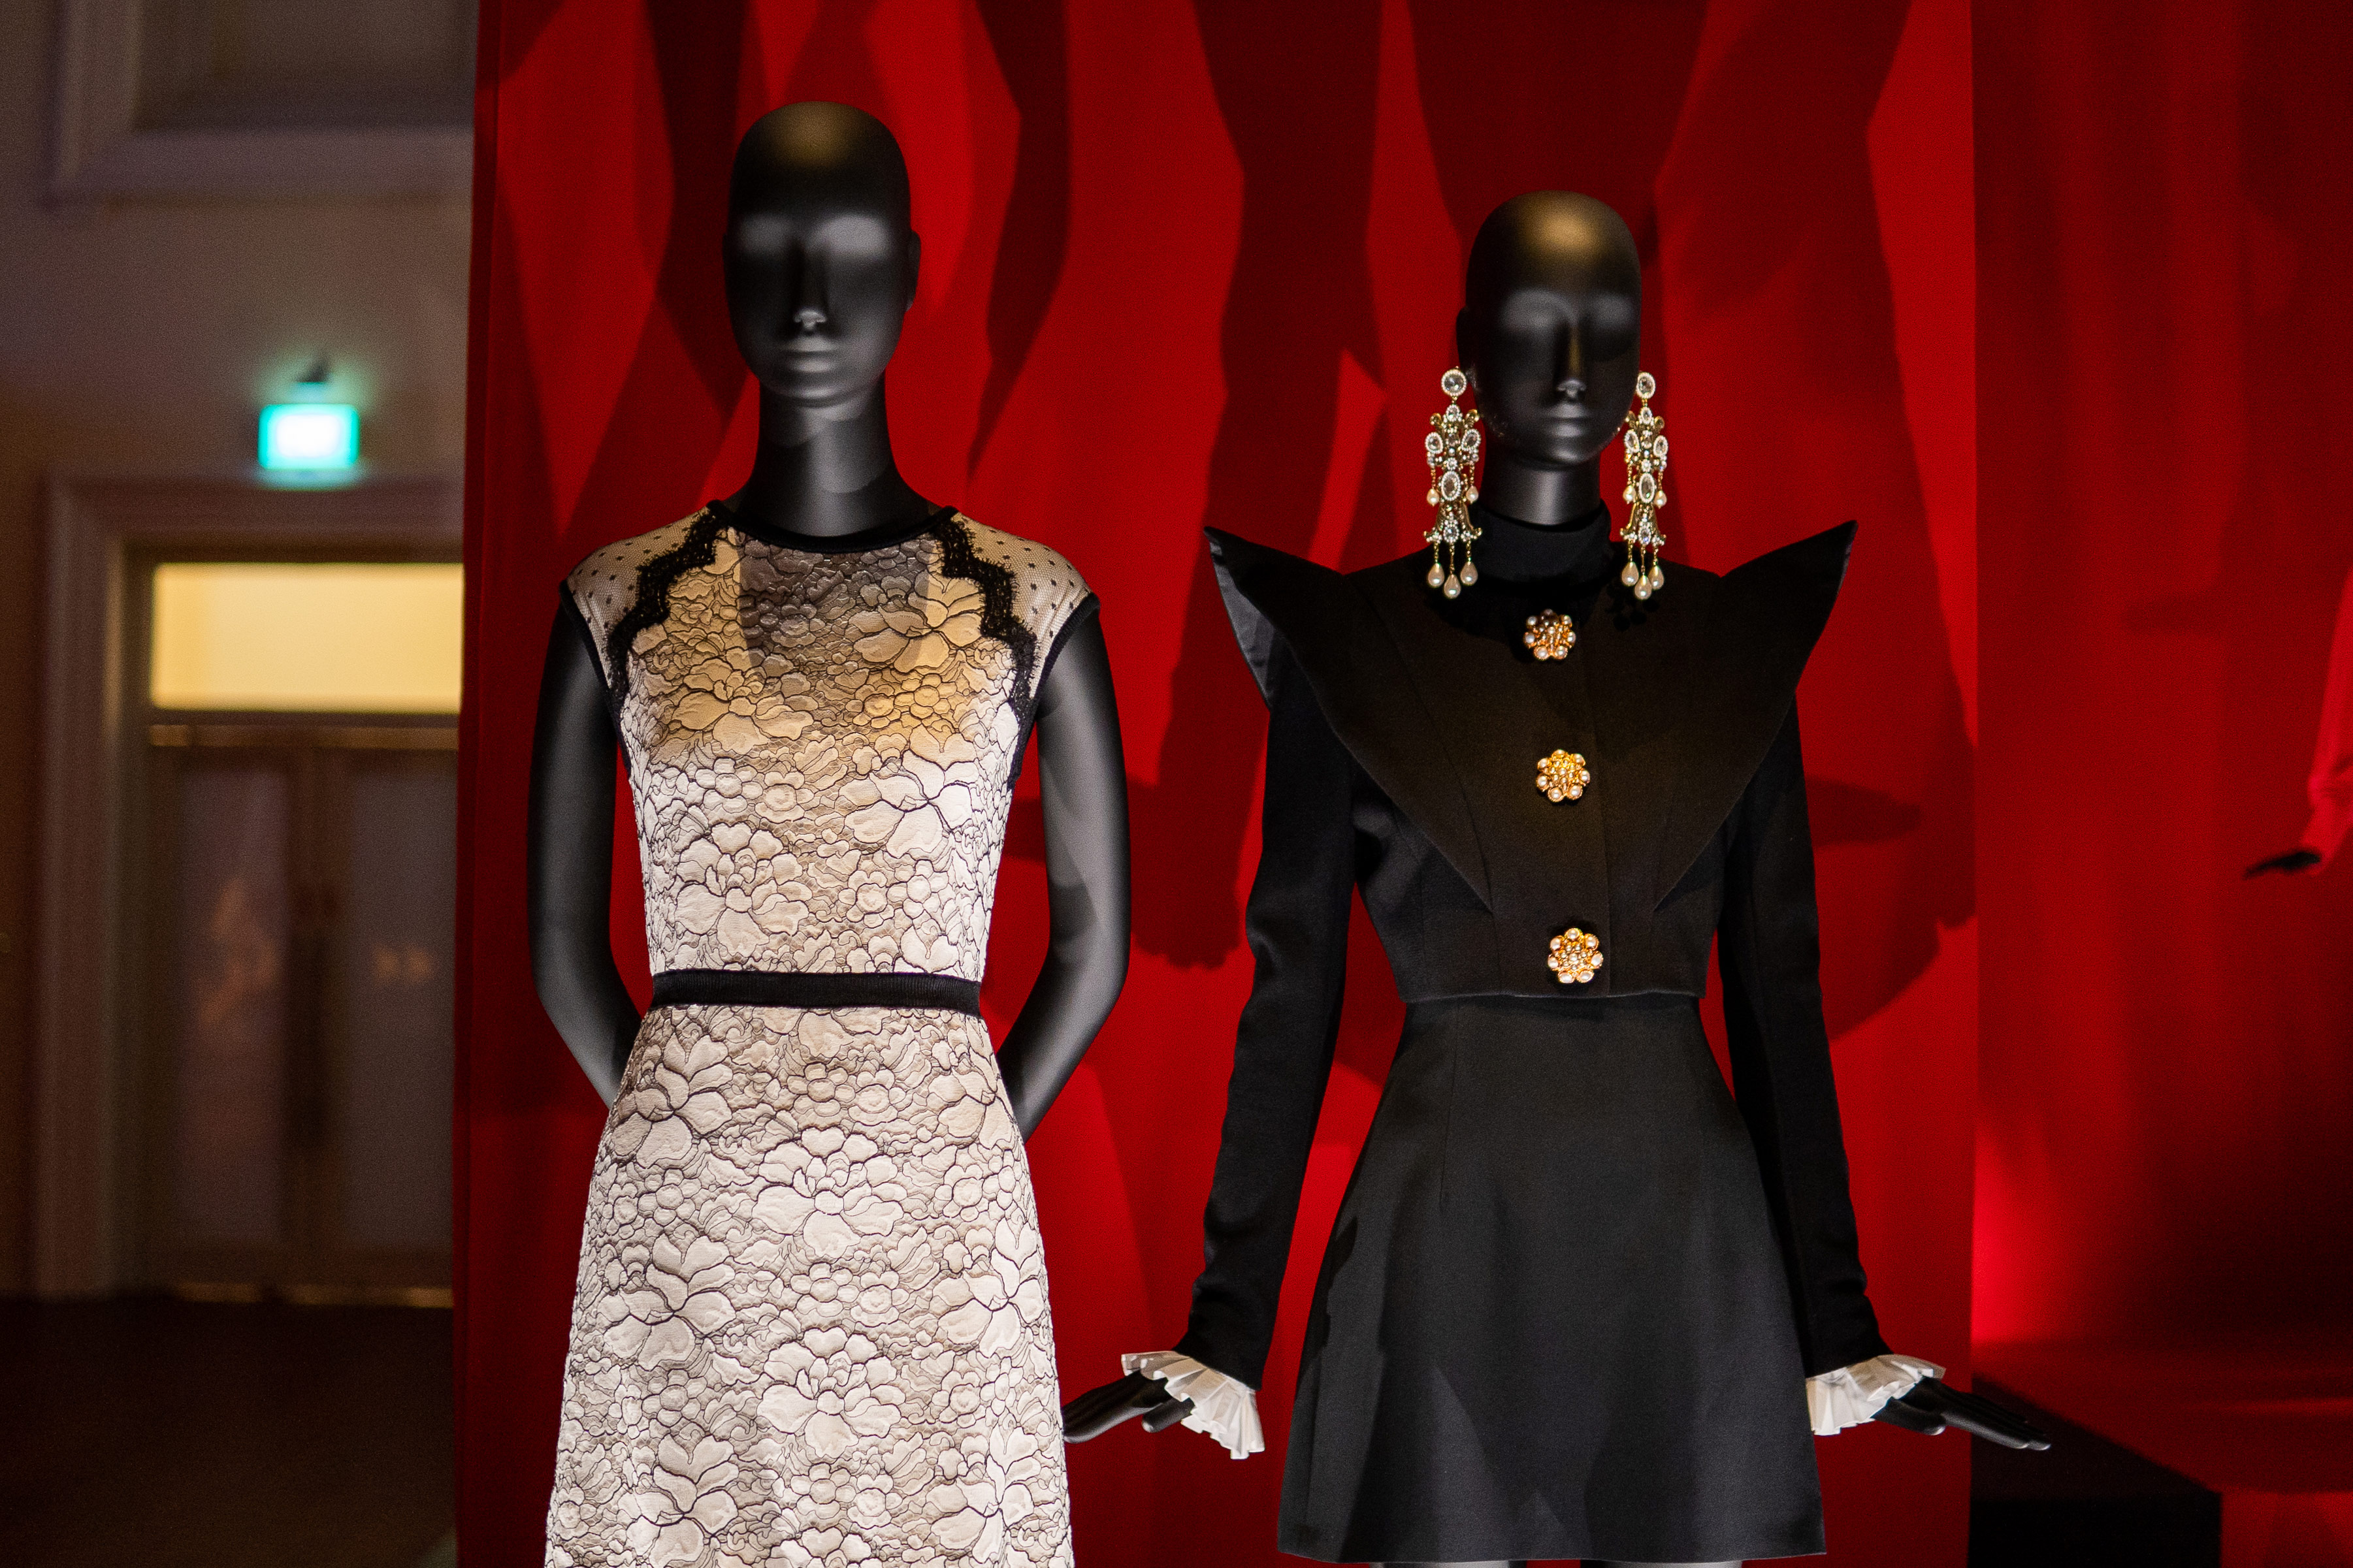 The dress on the left was worn by Emma Watson and the dress on the right was featured in the hit Netflix drama series, Emily in Paris which was worn by Lily Collins.